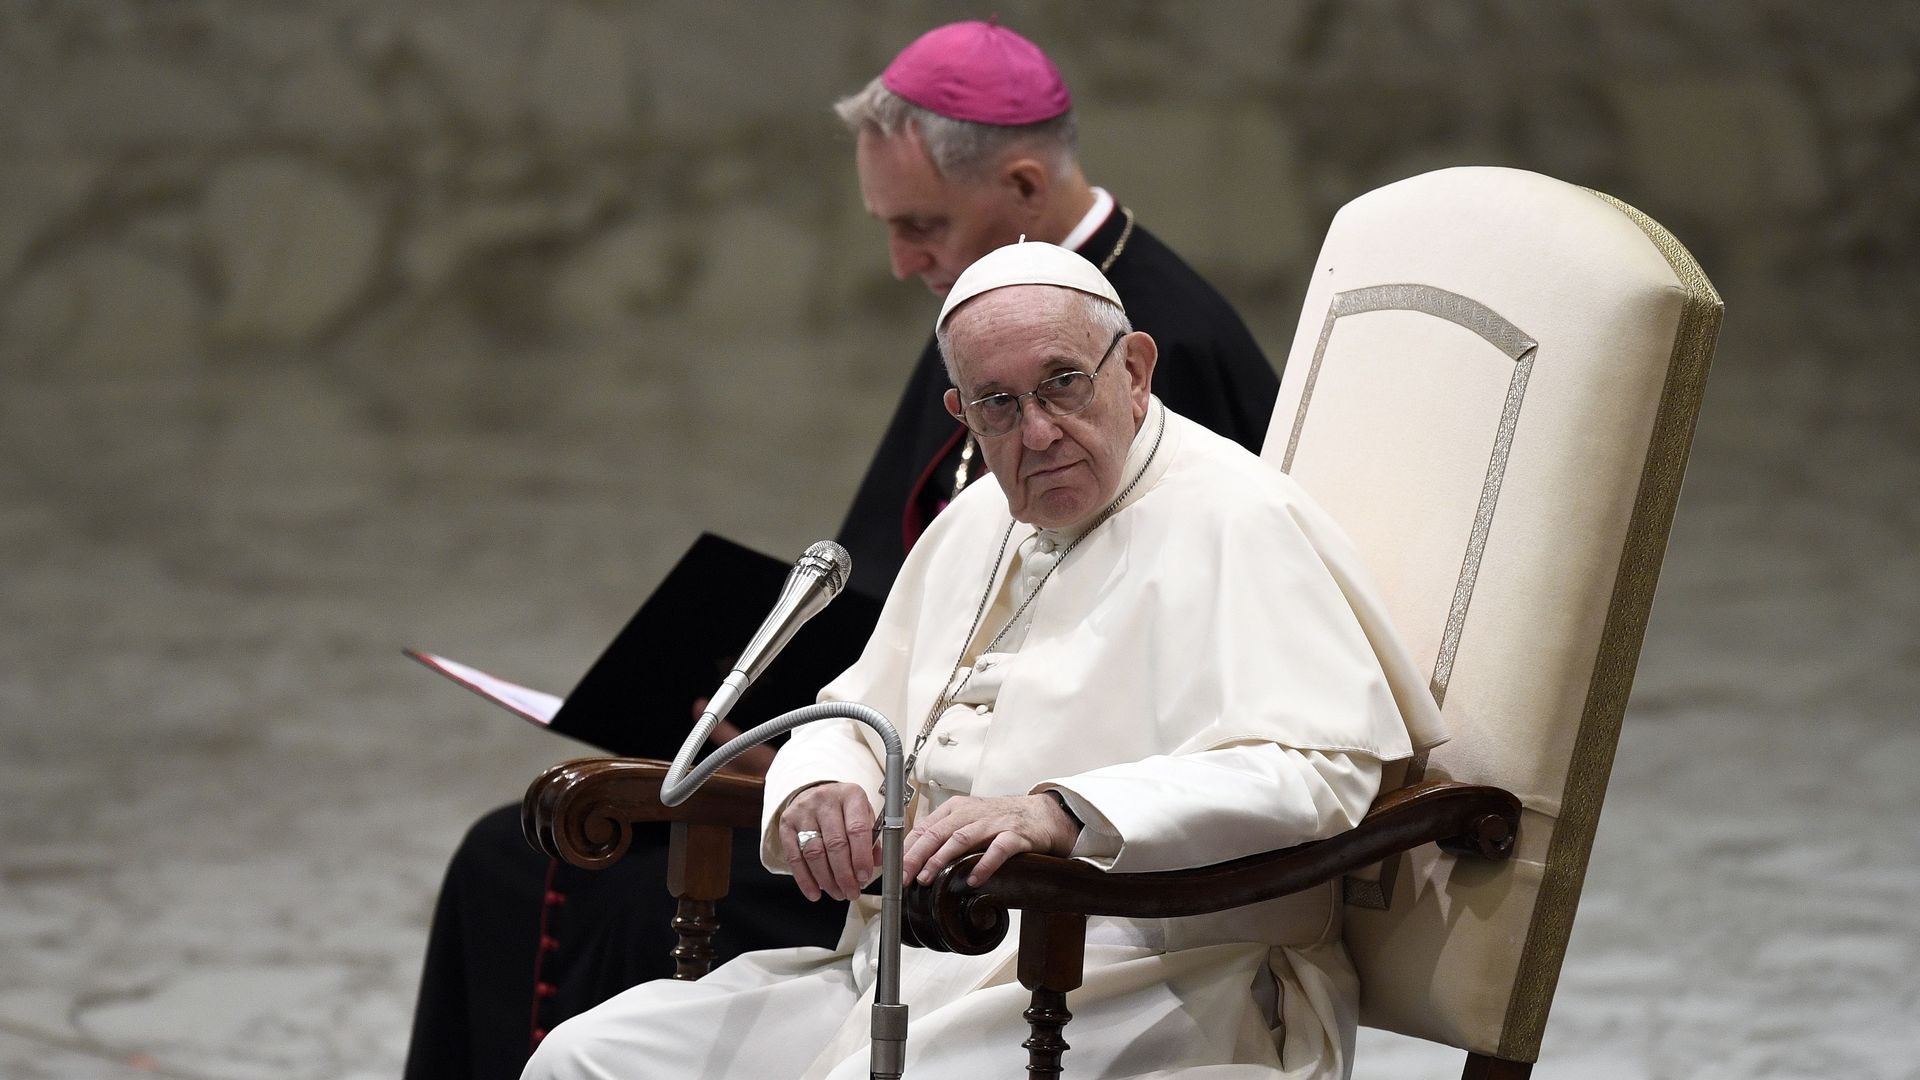 The pope sitting in a chair looking to the side, looking serious.